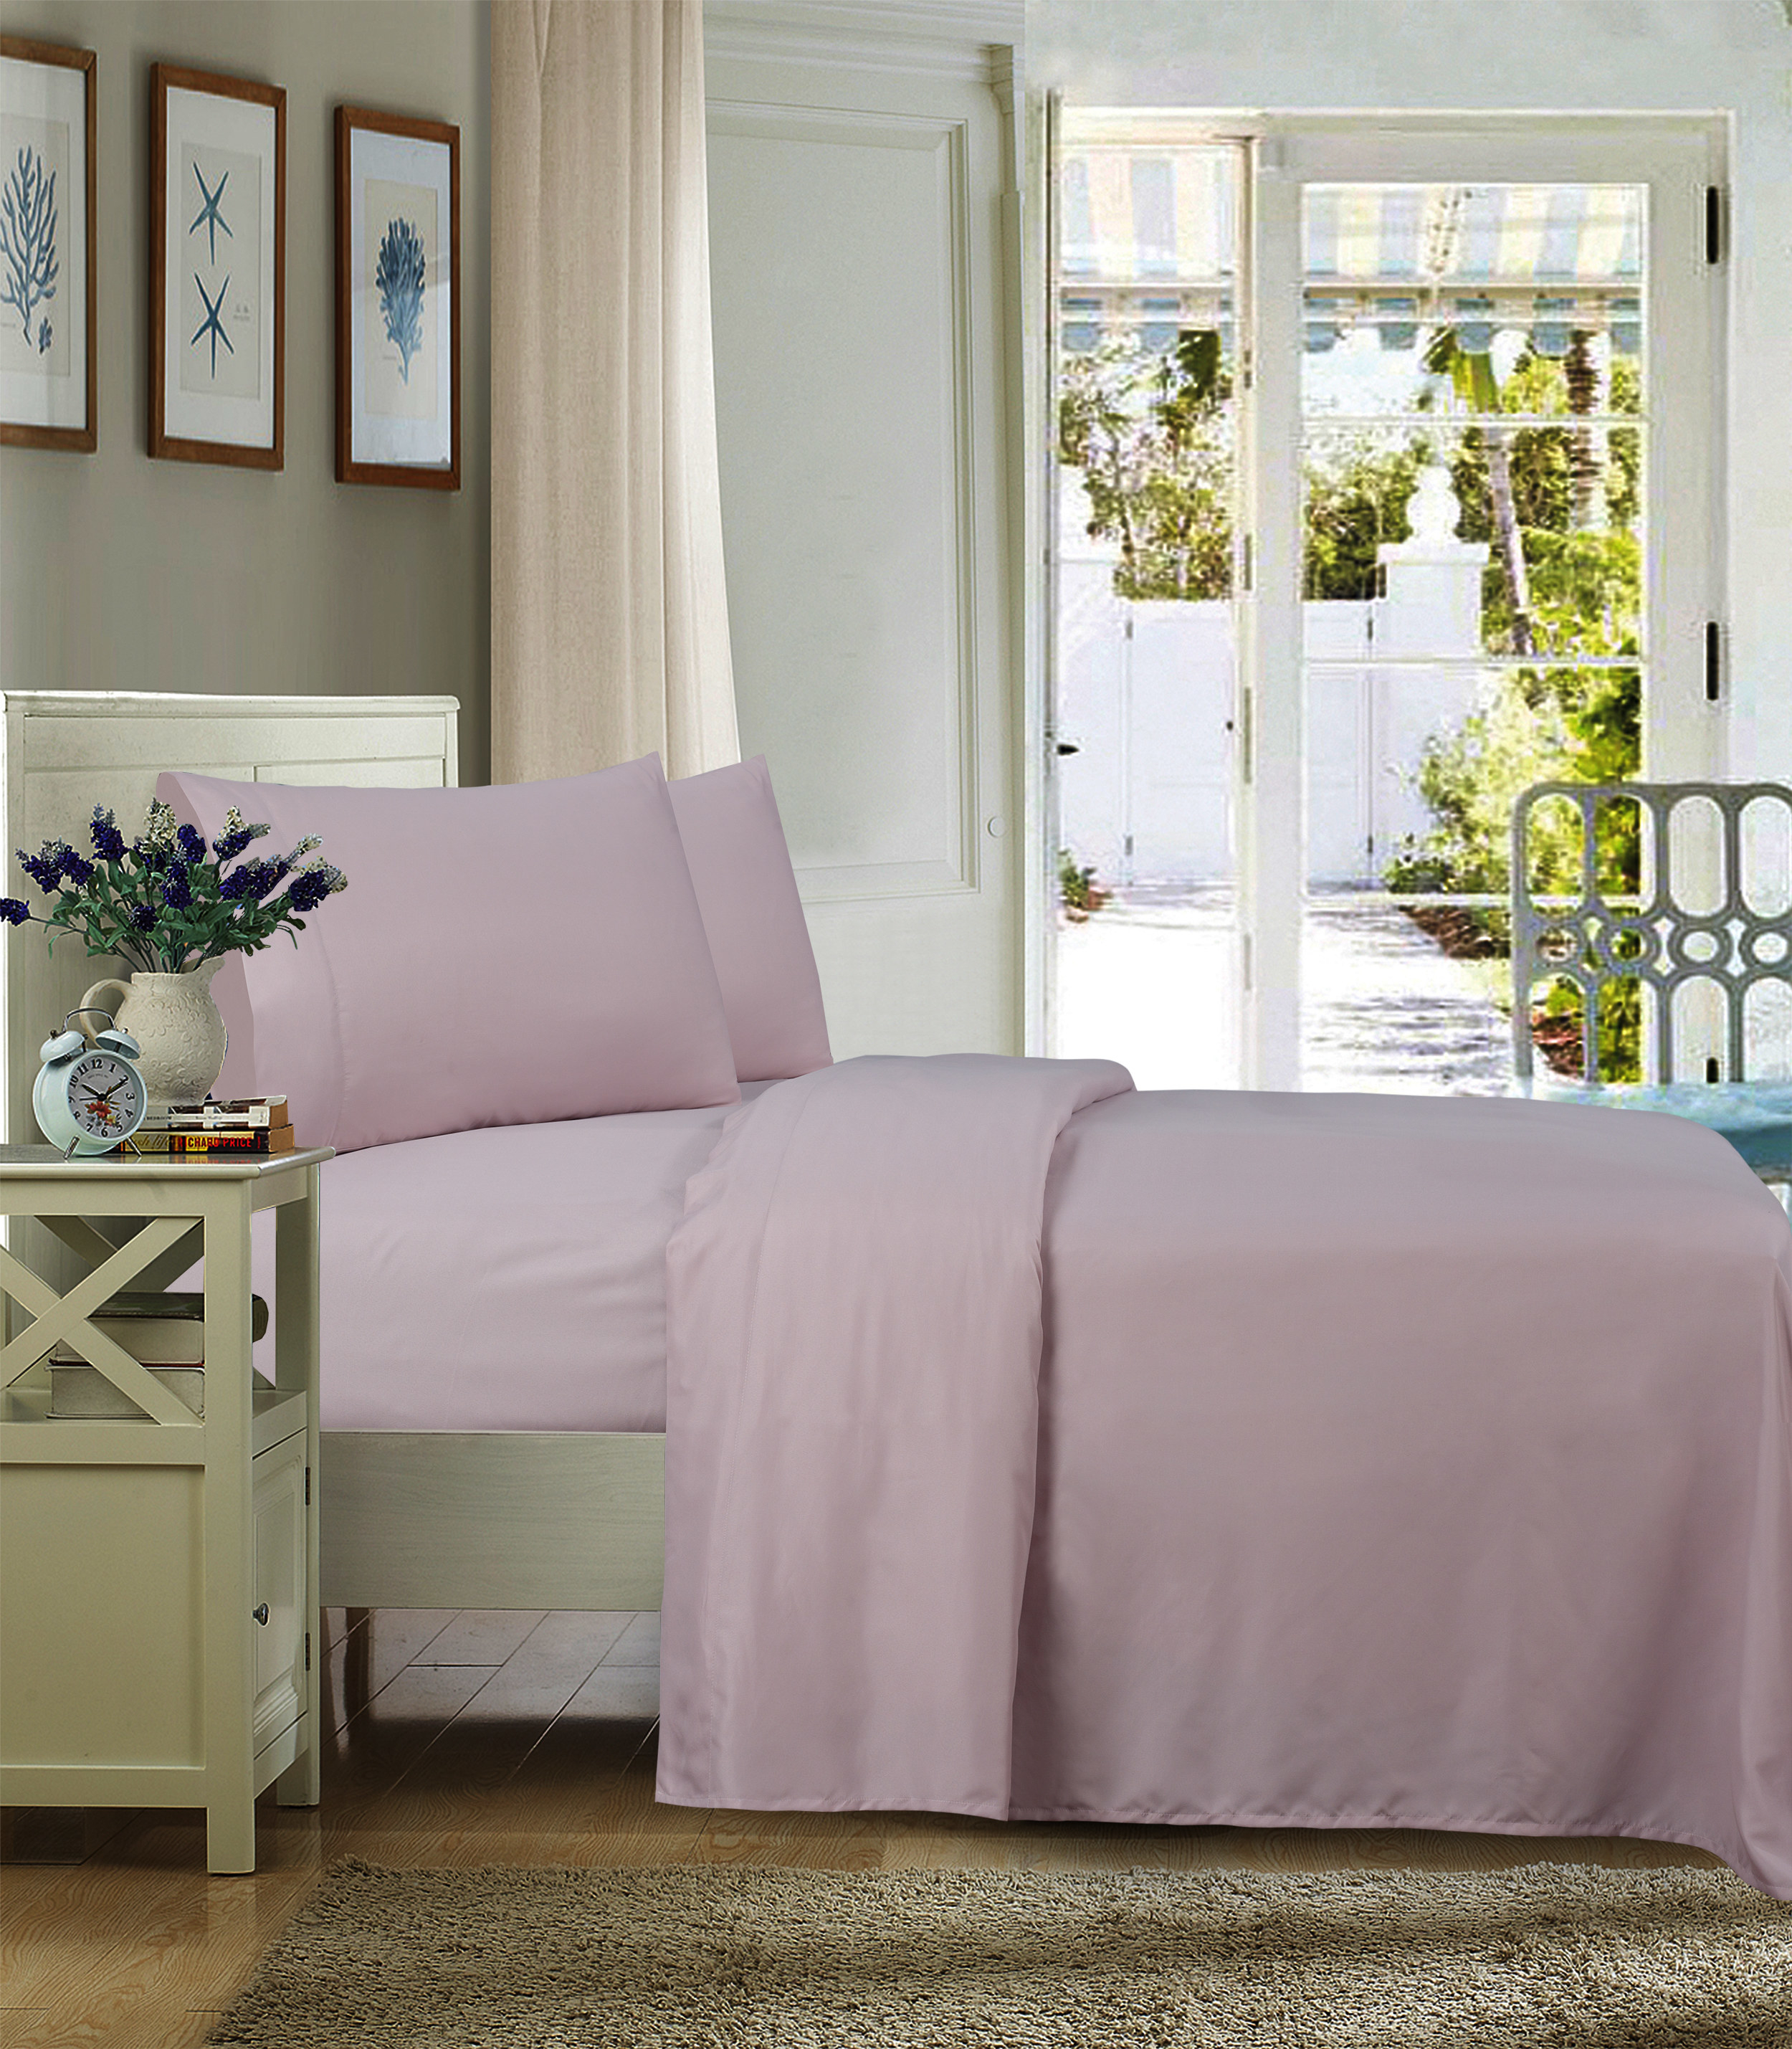 The sheets on a bed in a light pink shade